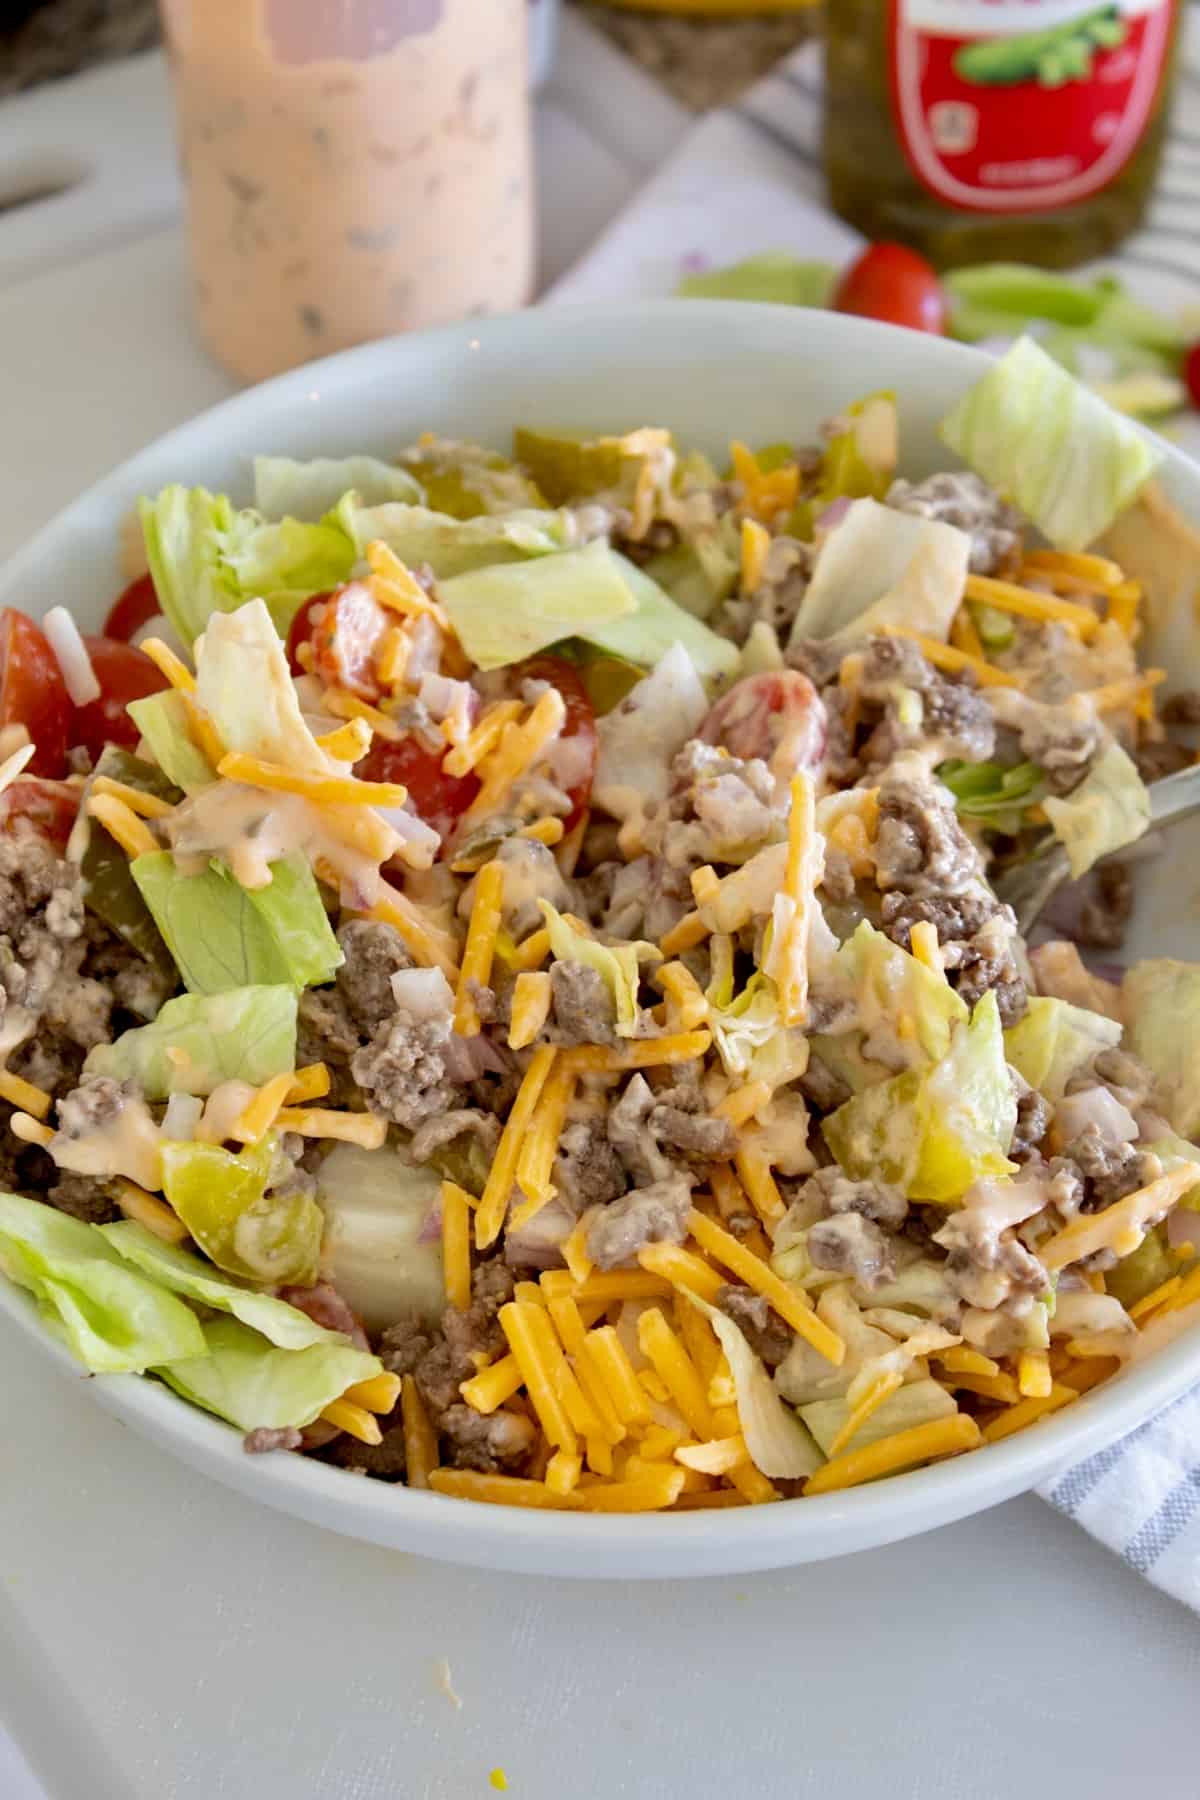 tossed cheeseburger salad in white bowl